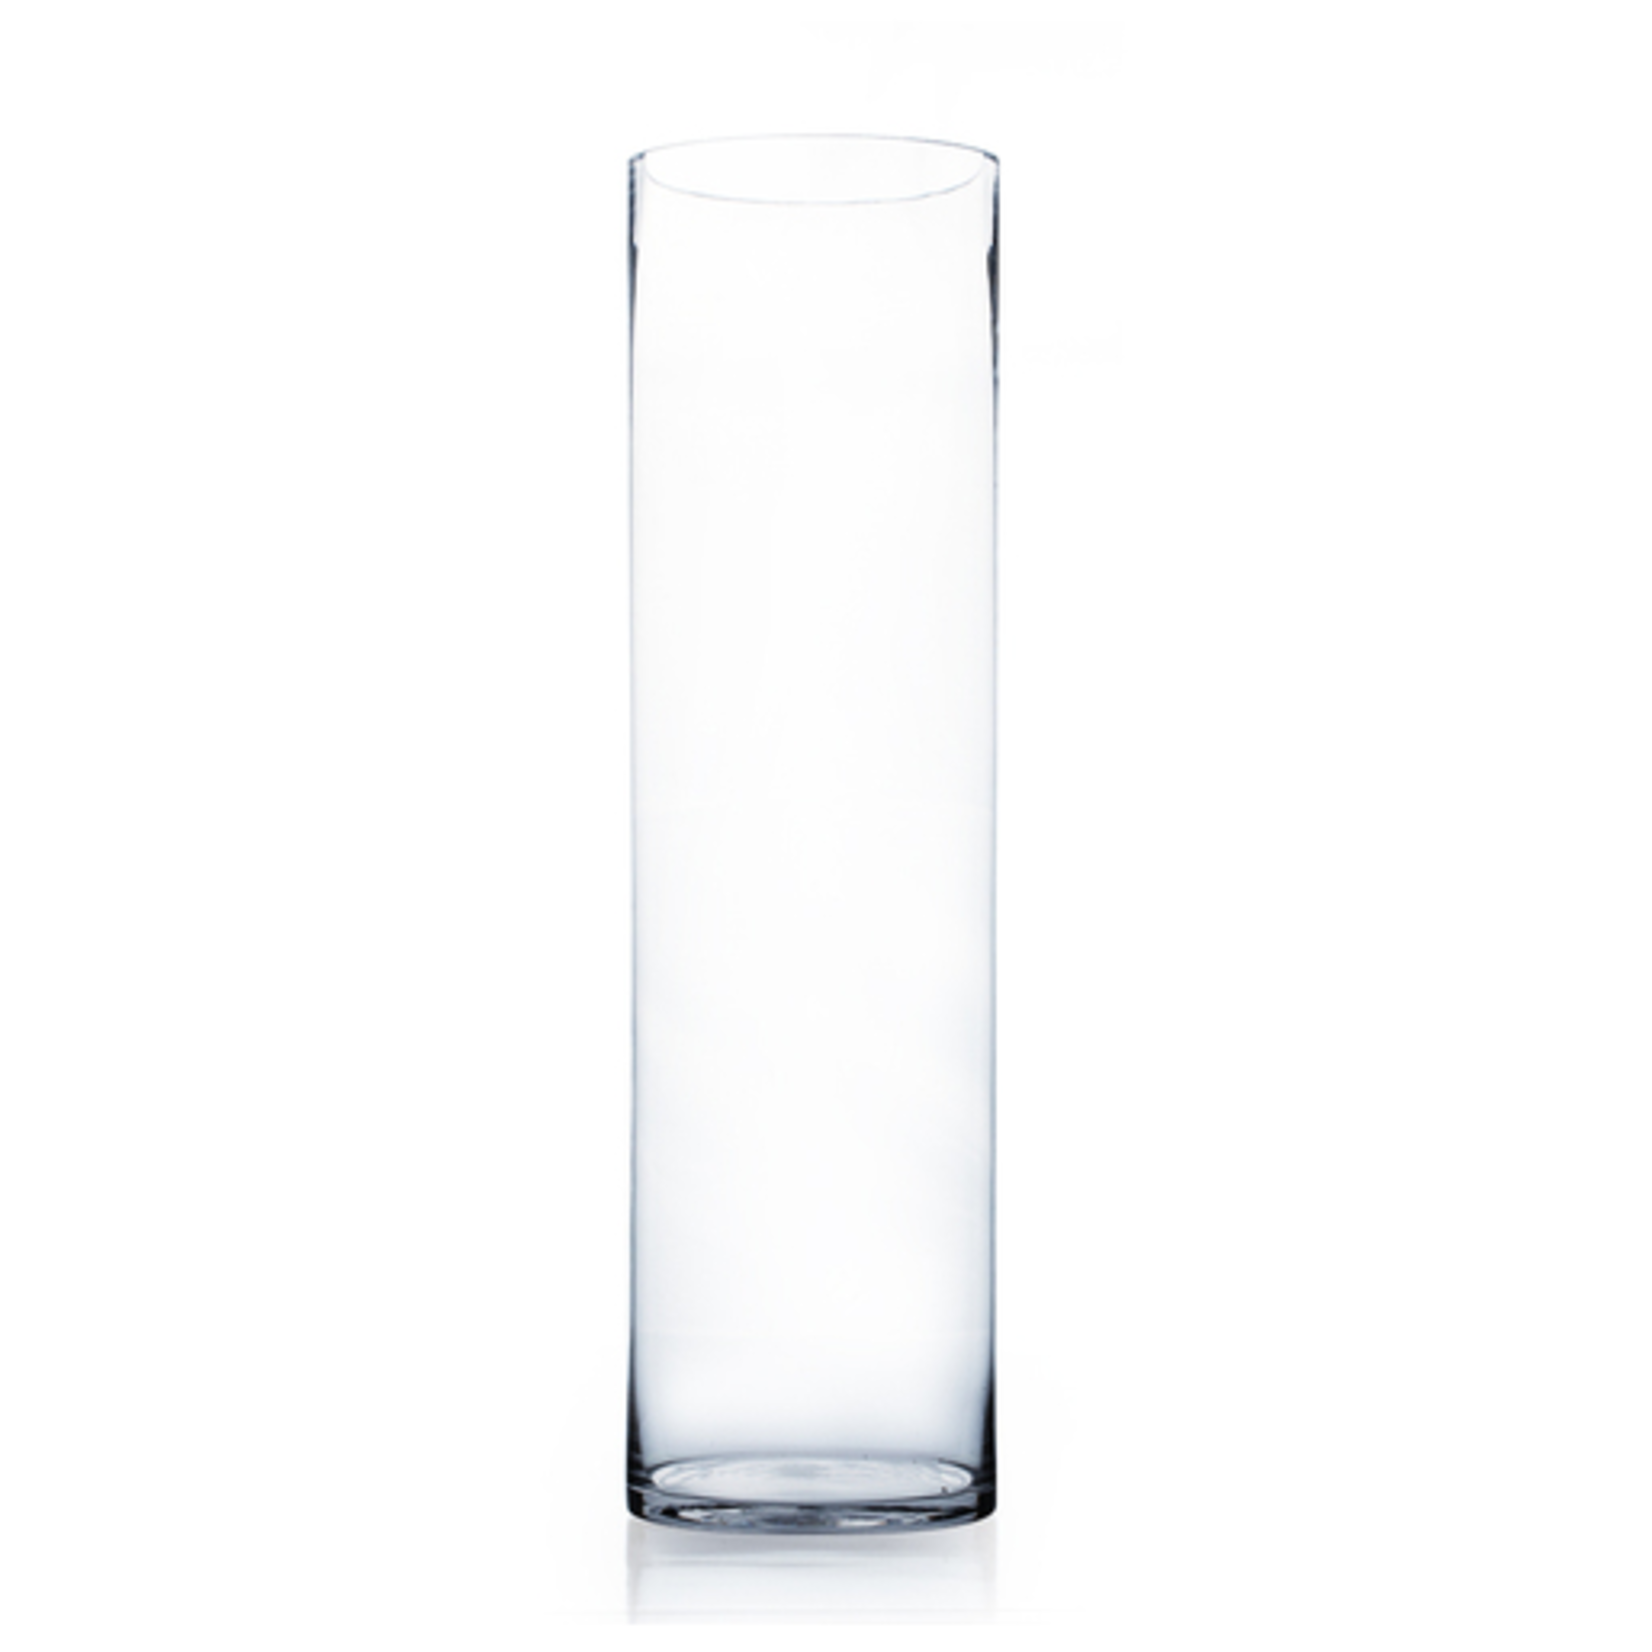 20"H X 8" CLEAR GLASS CYLINDER VASE